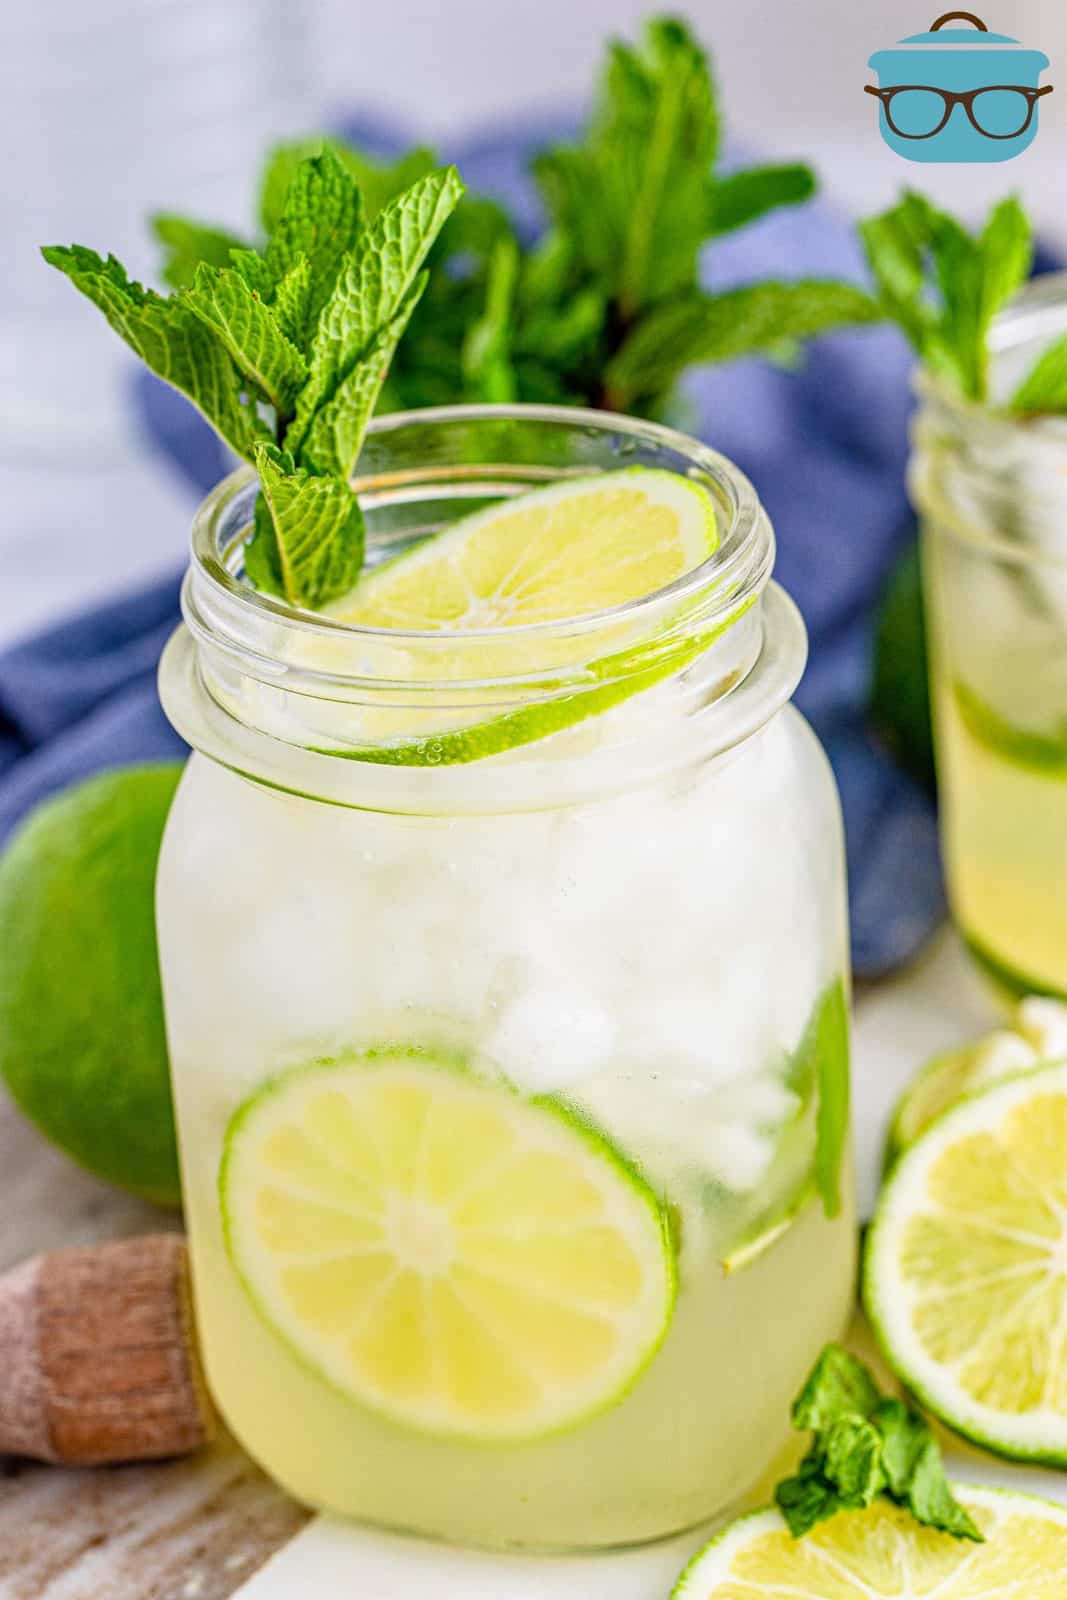 Summer Mojito shown in a glass with mint and limes.